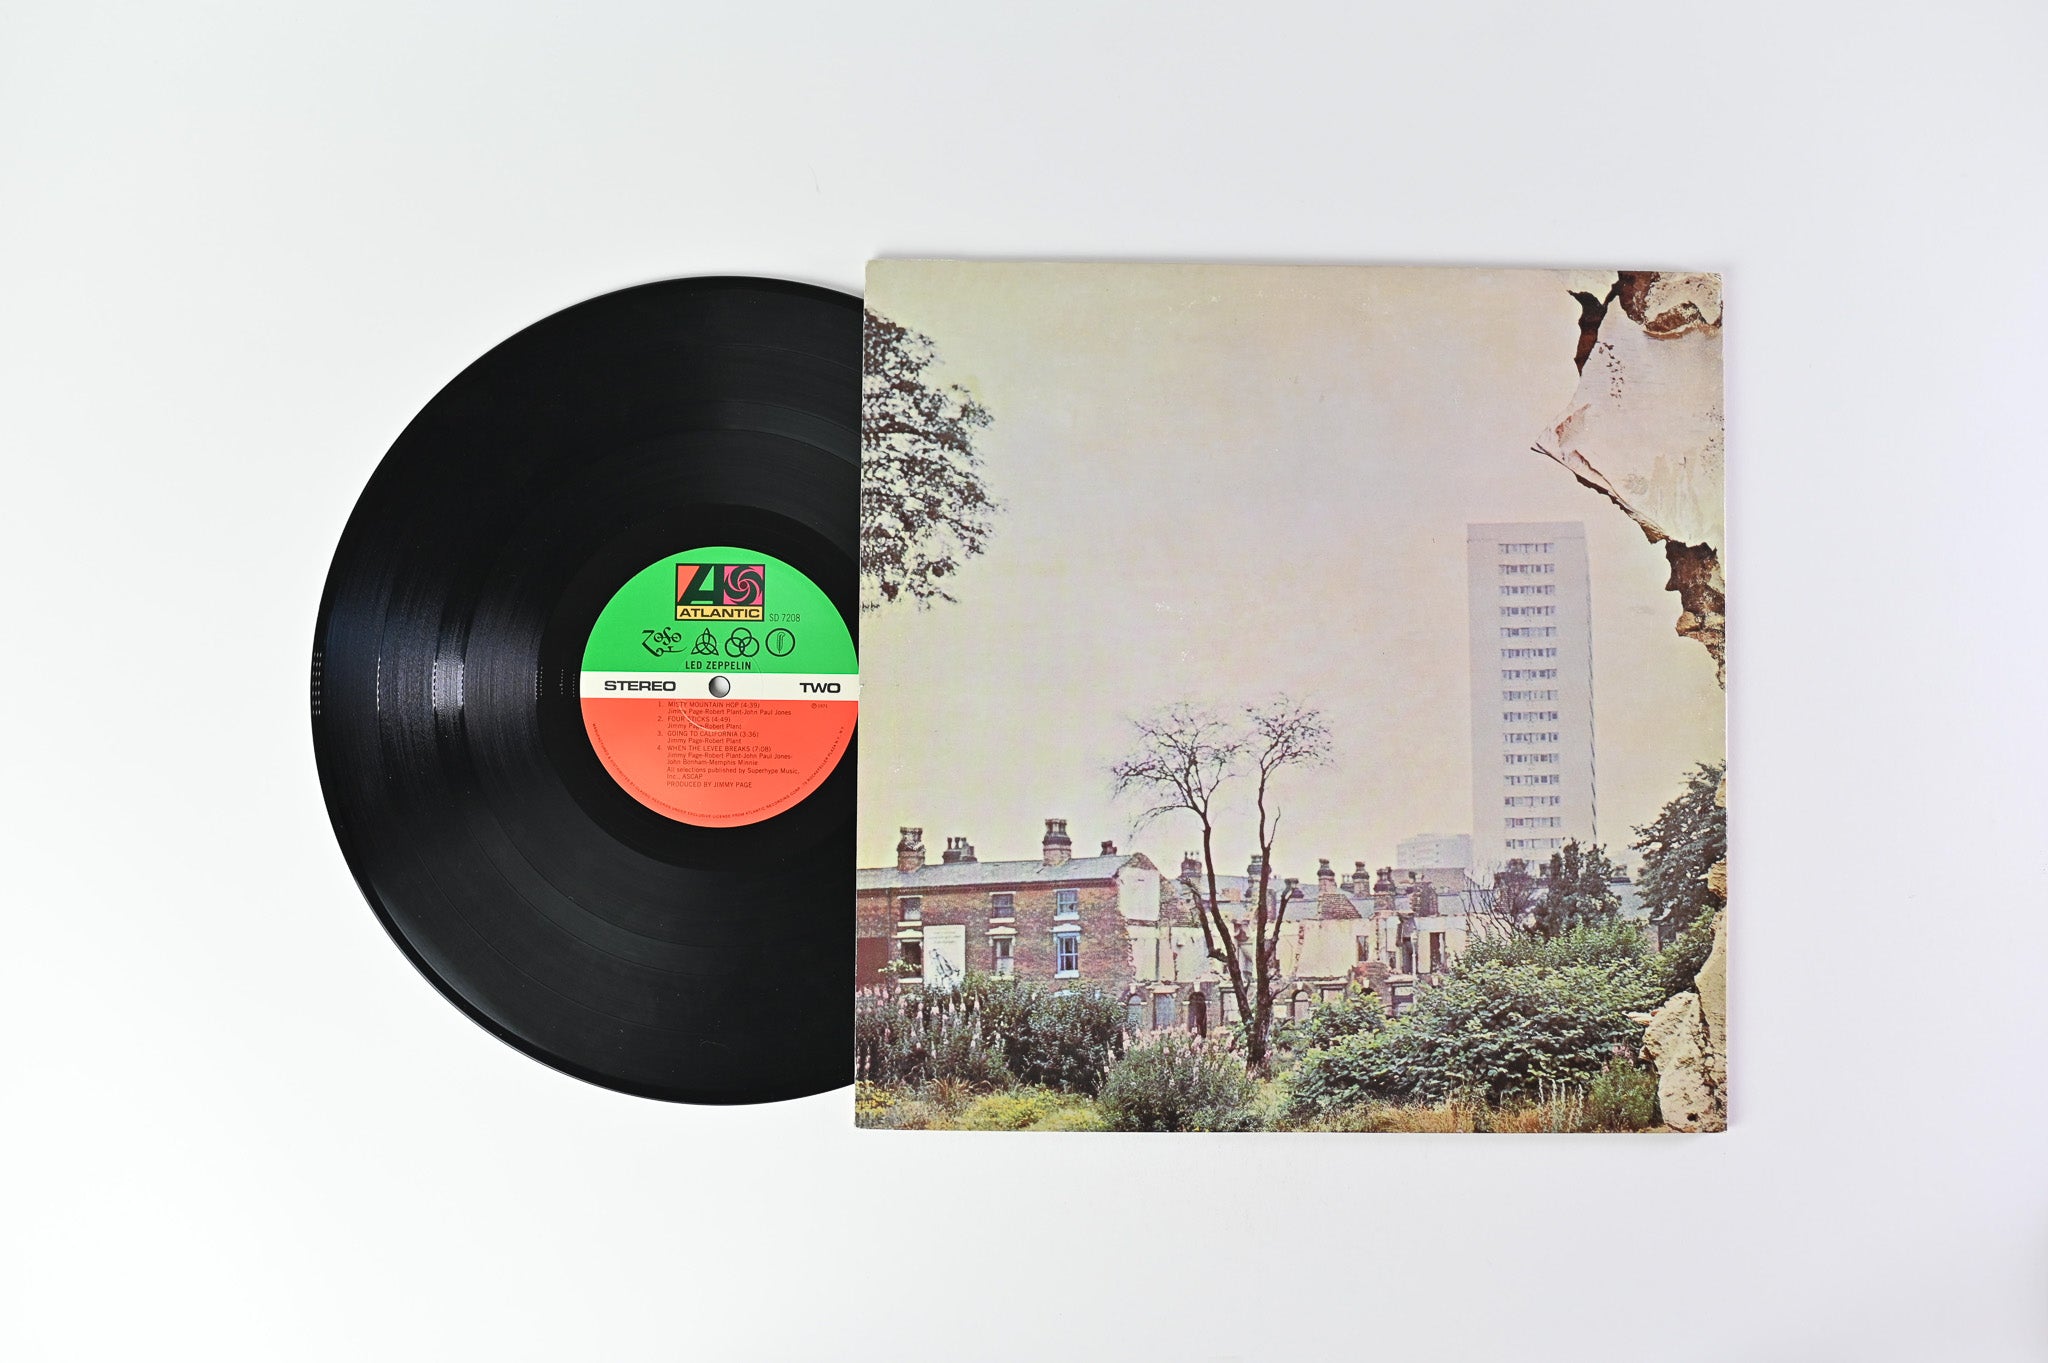 Led Zeppelin - Untitled on Classic Records Reissue